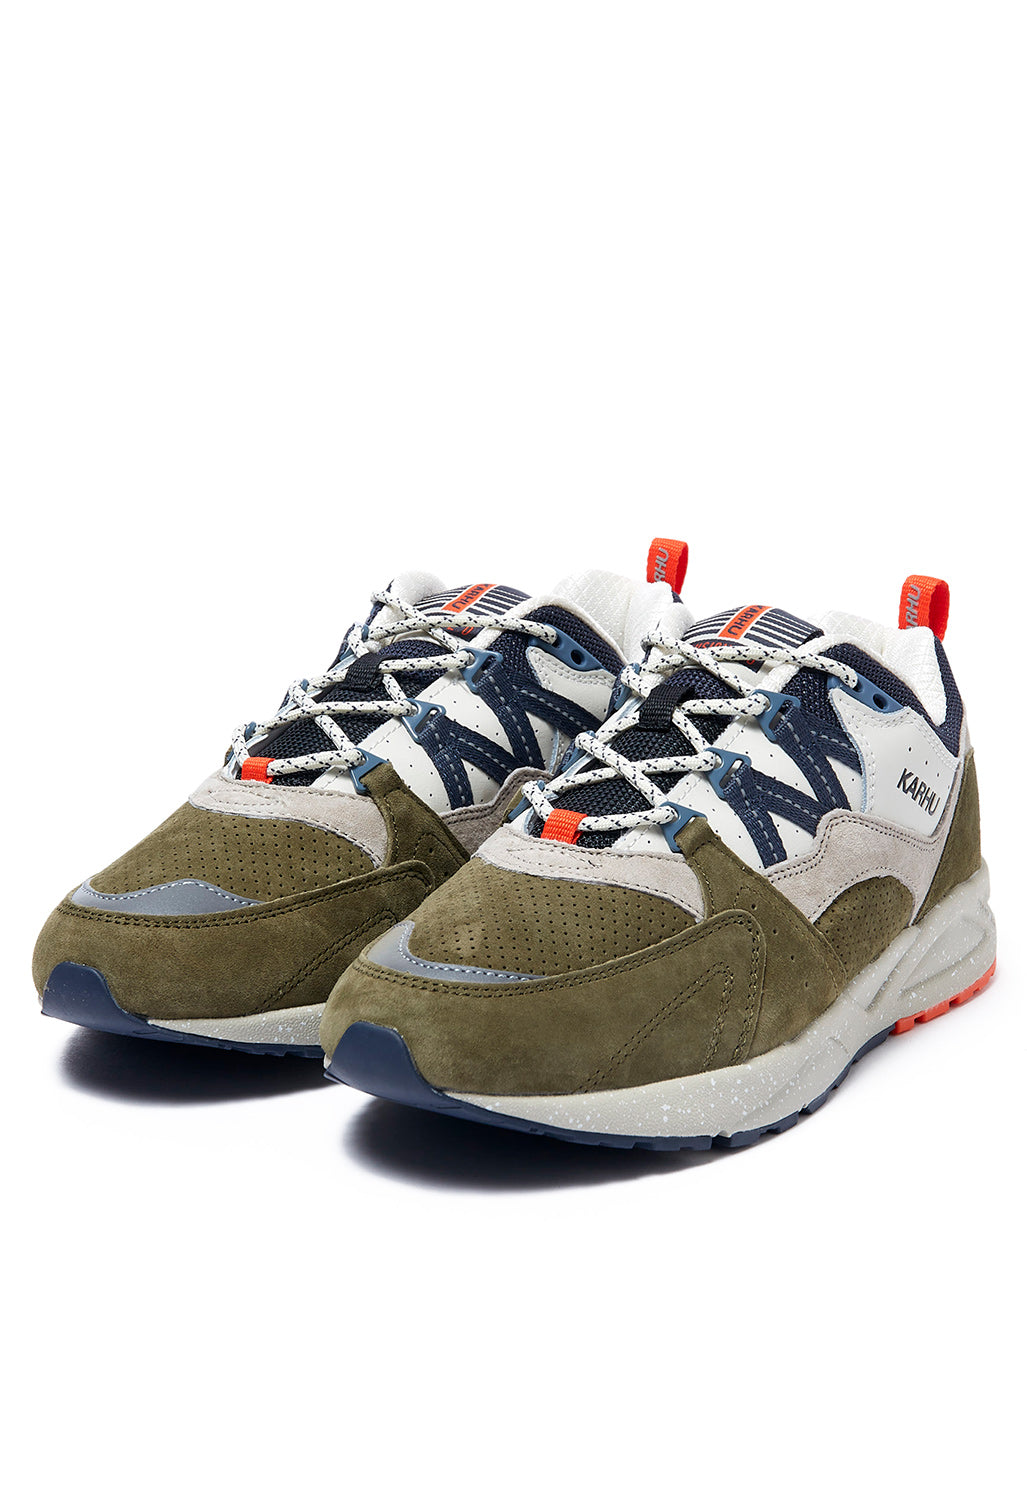 Karhu Fusion 2.0 Trainers - Capers/India Ink